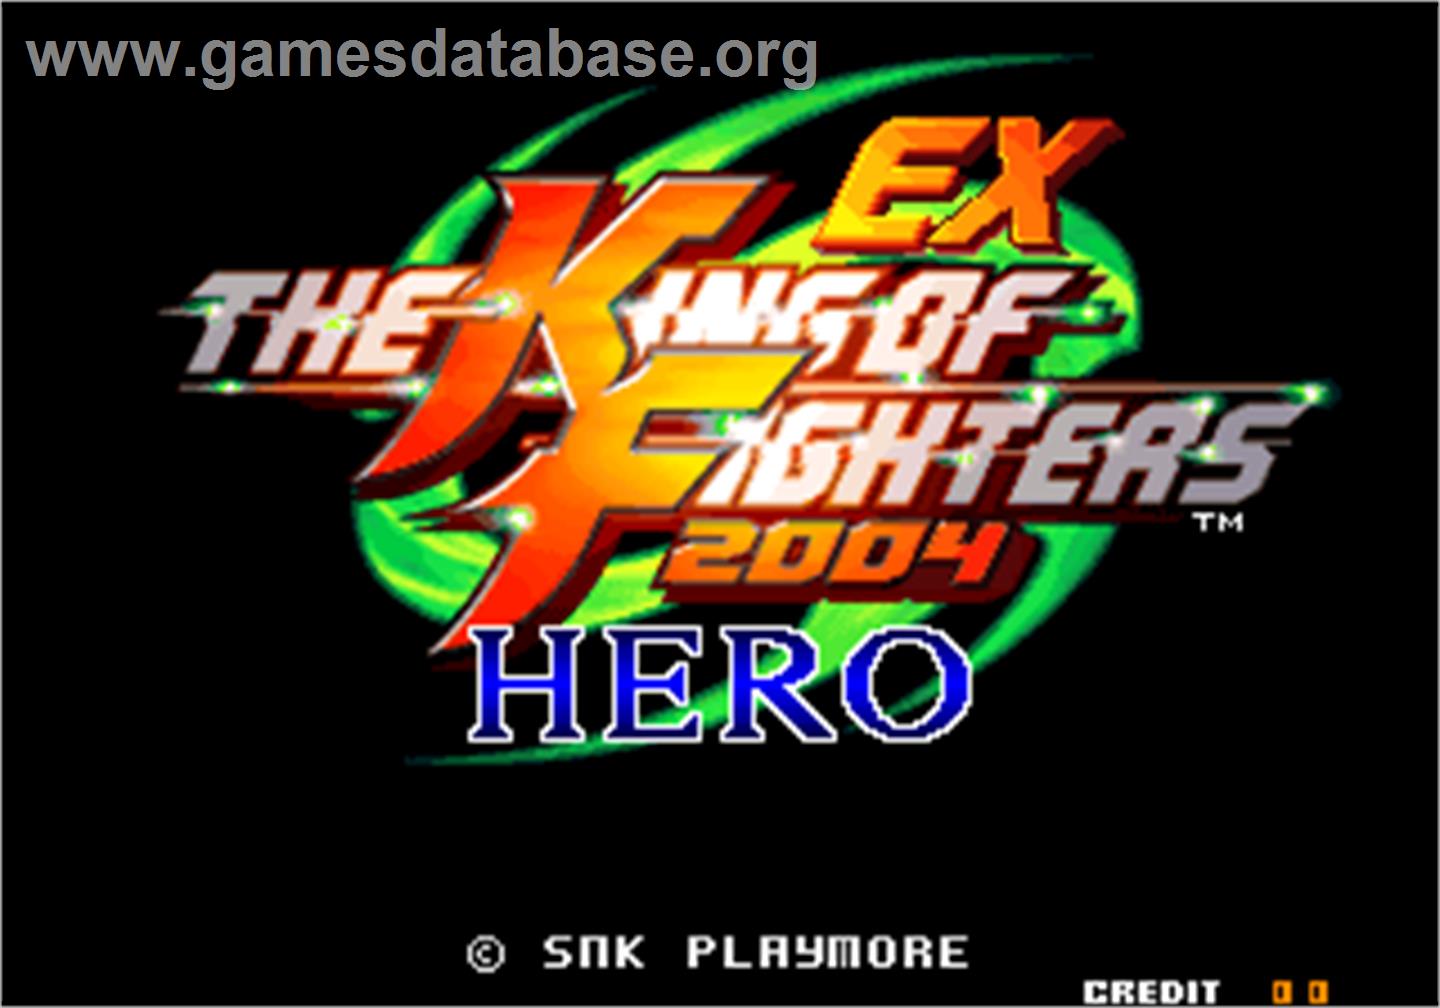 The King of Fighters 2004 Plus / Hero - Arcade - Artwork - Title Screen